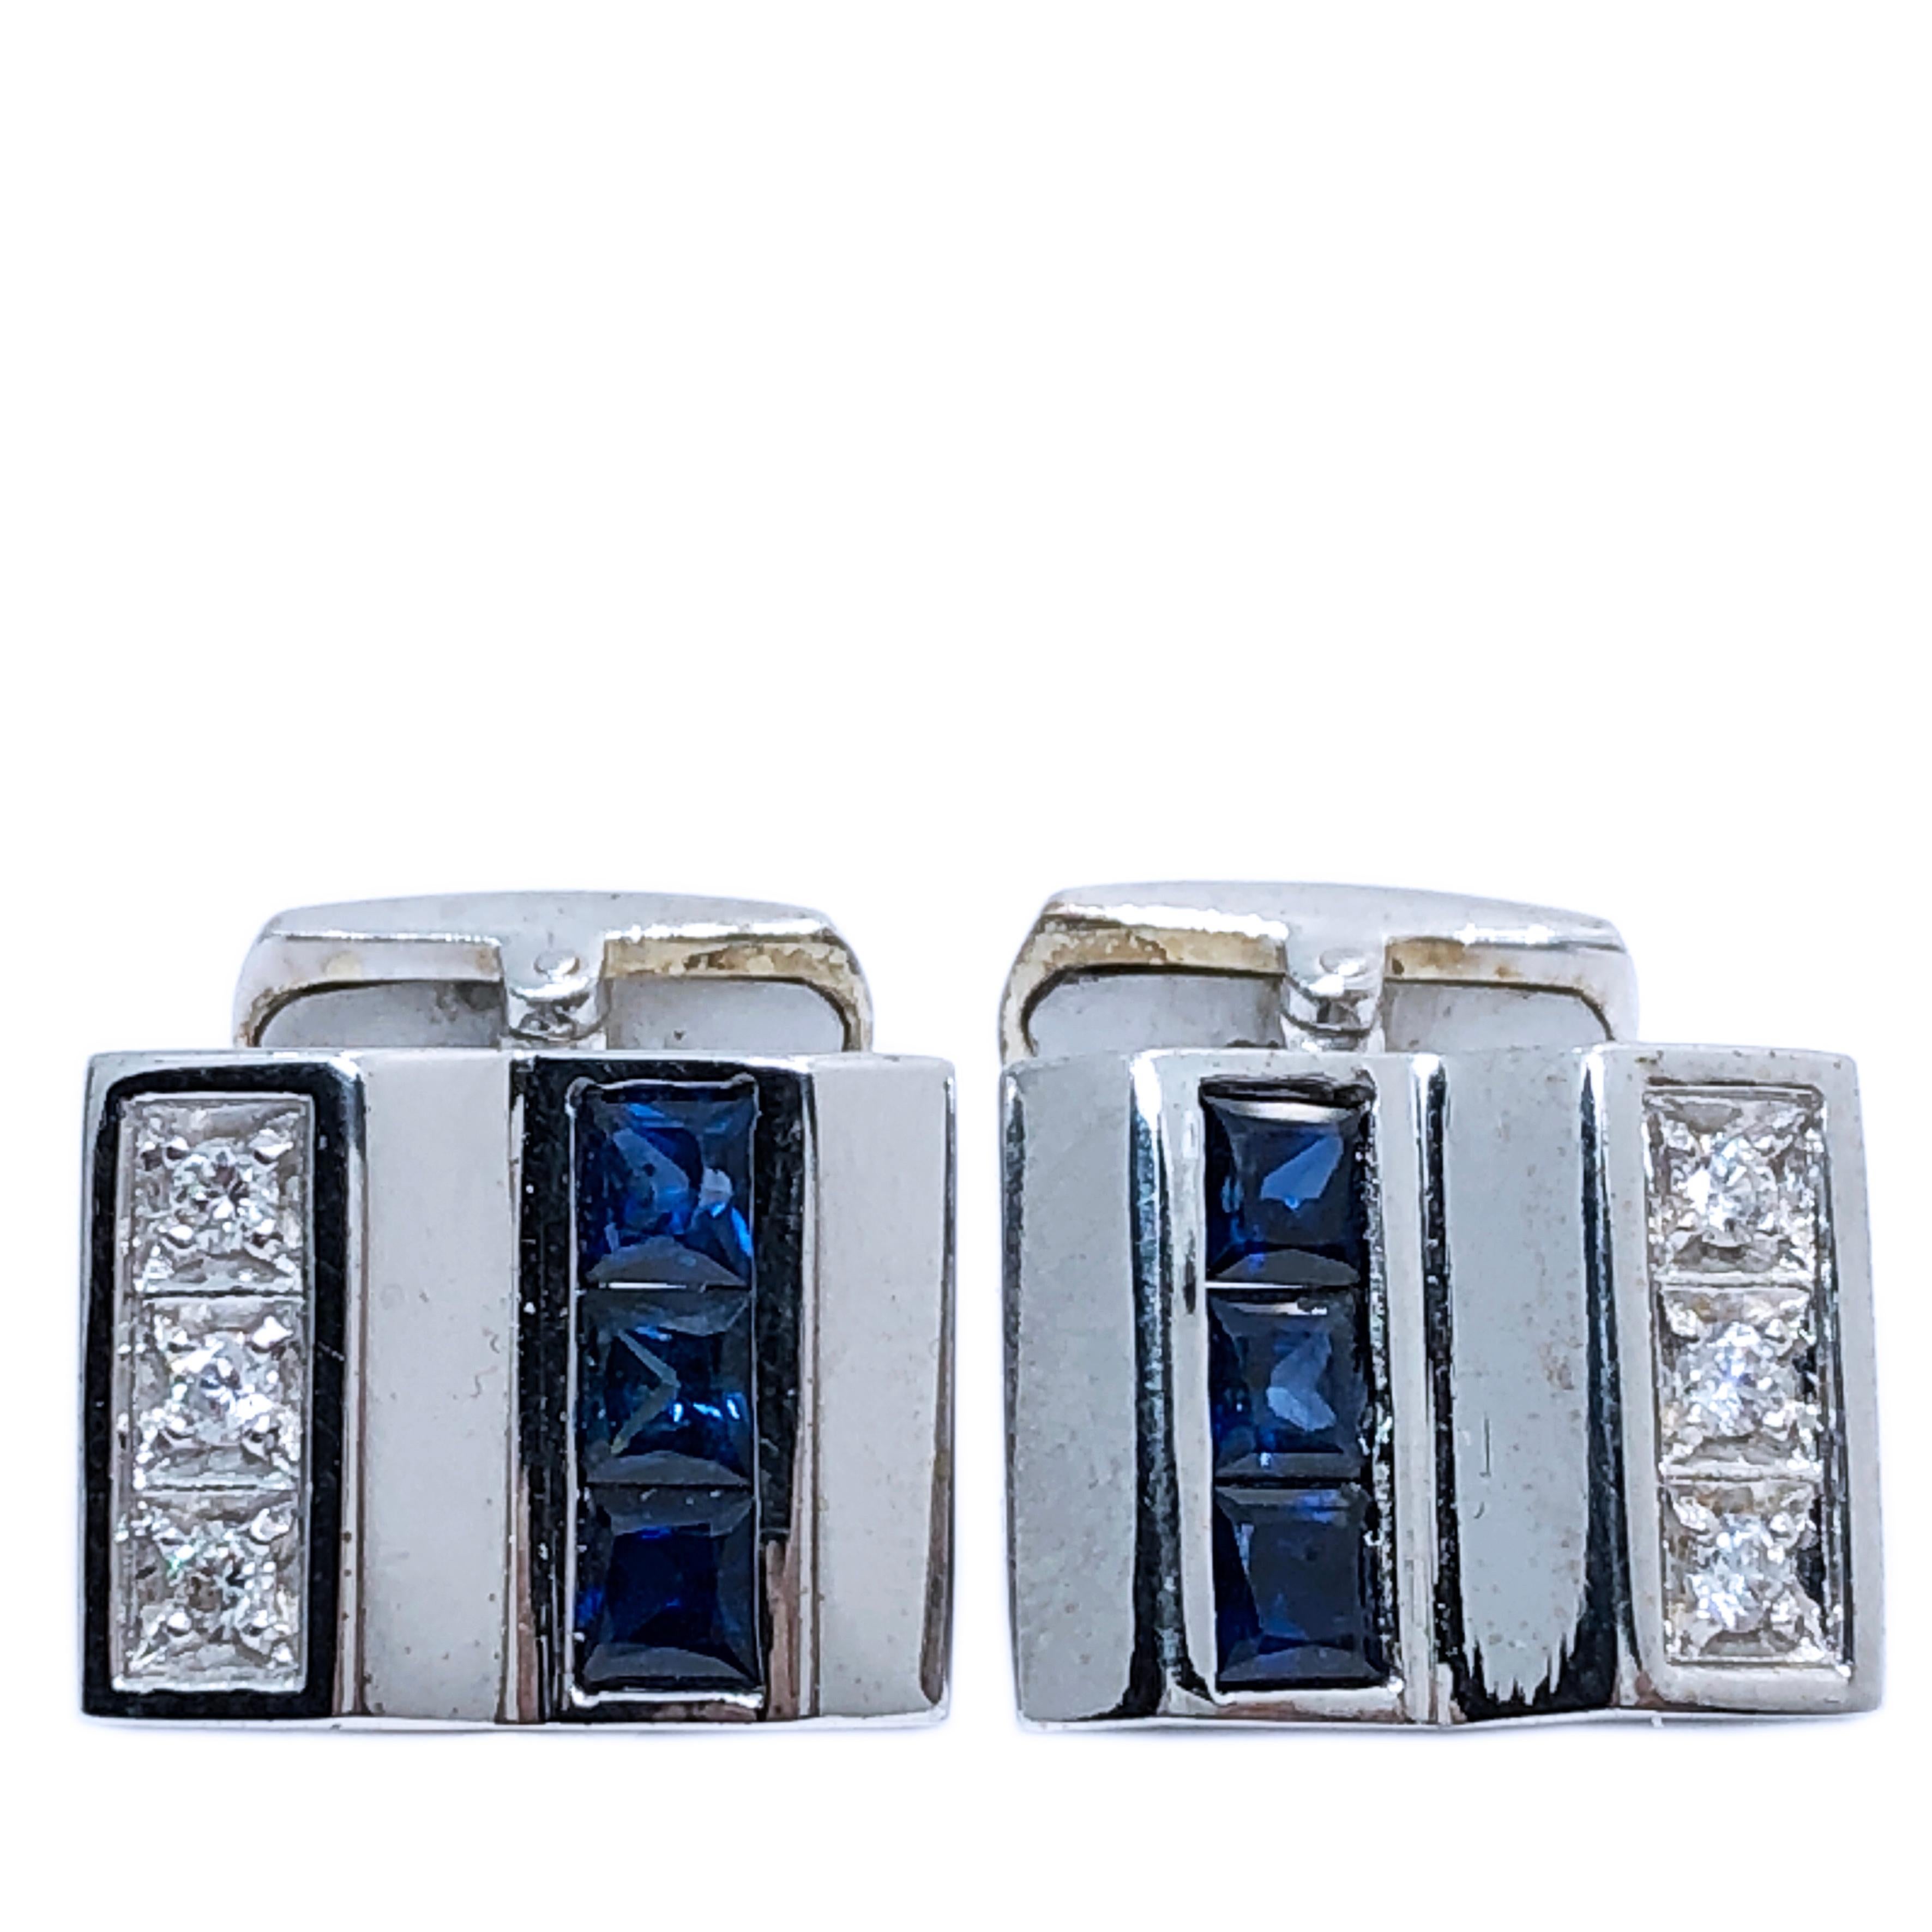 Smart, Chic and Timeless Cufflinks featuring 1.88 Carat Princess Cut Blue Sapphire 0.34 Carat White Diamond 0.37 Troy Ounces White Gold Setting, T-Bar Back